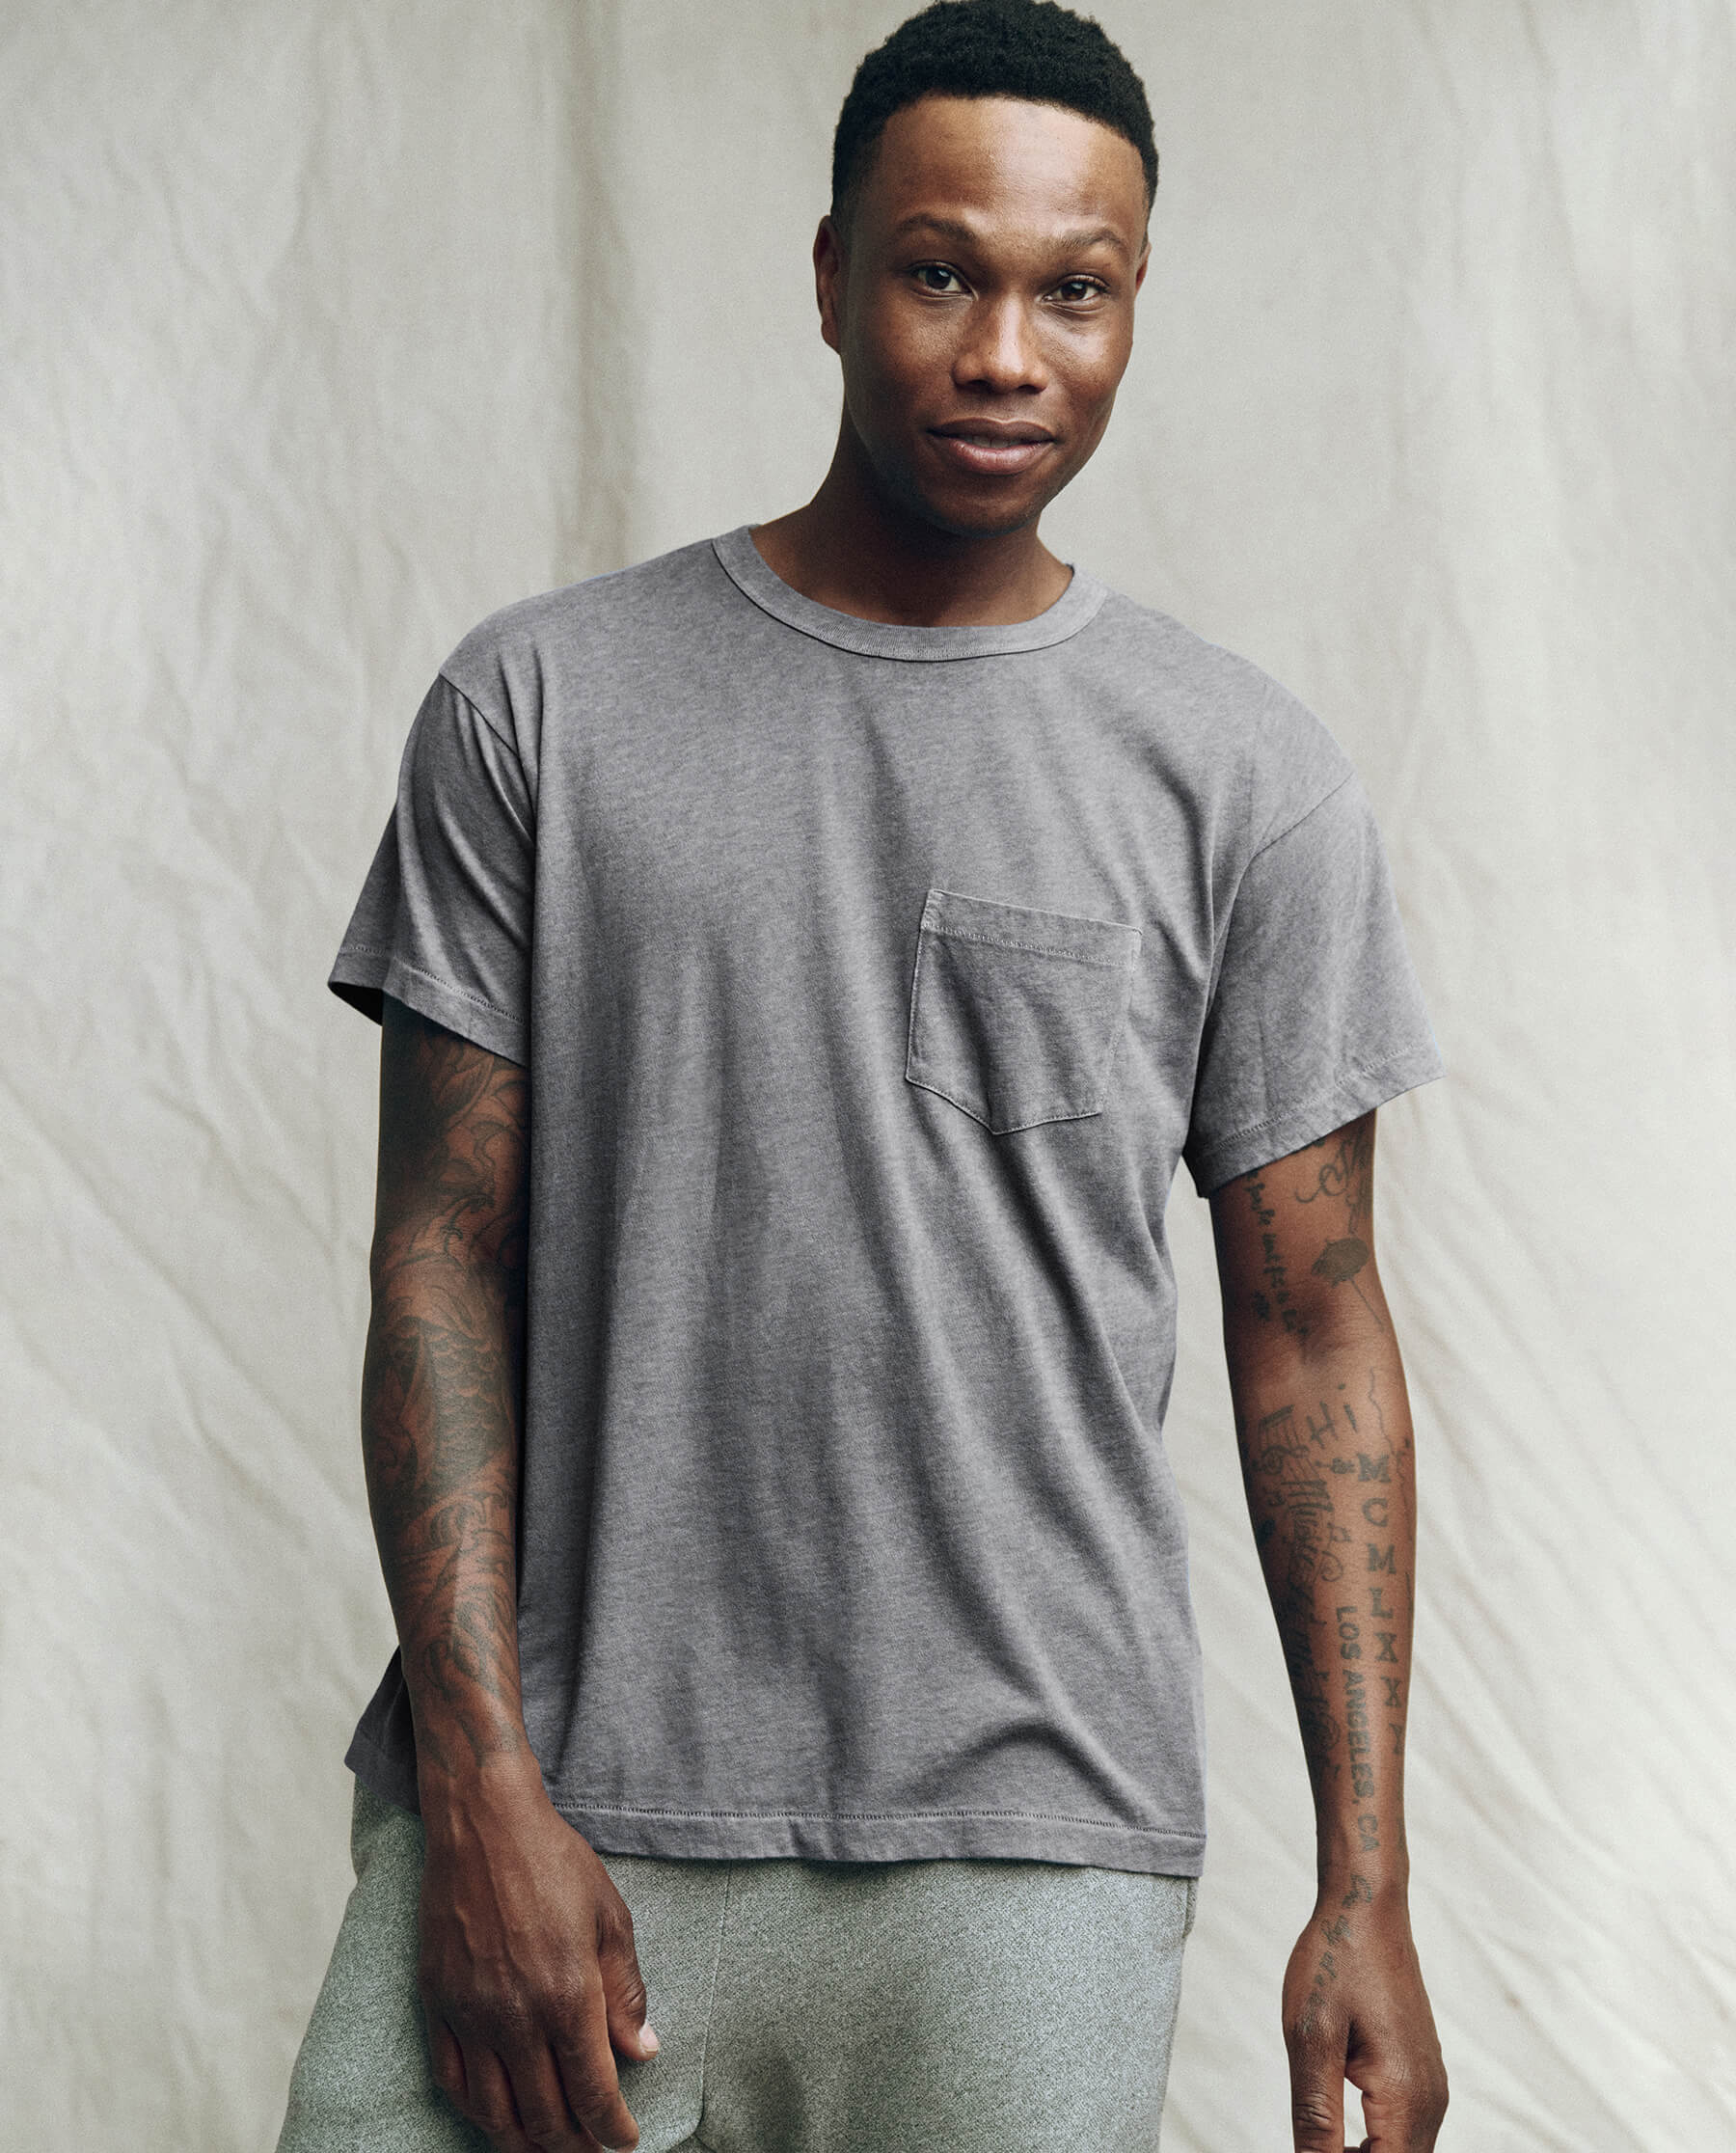 The Men's Pocket Tee. -- Heather Grey TEES THE GREAT. SP23 MENS